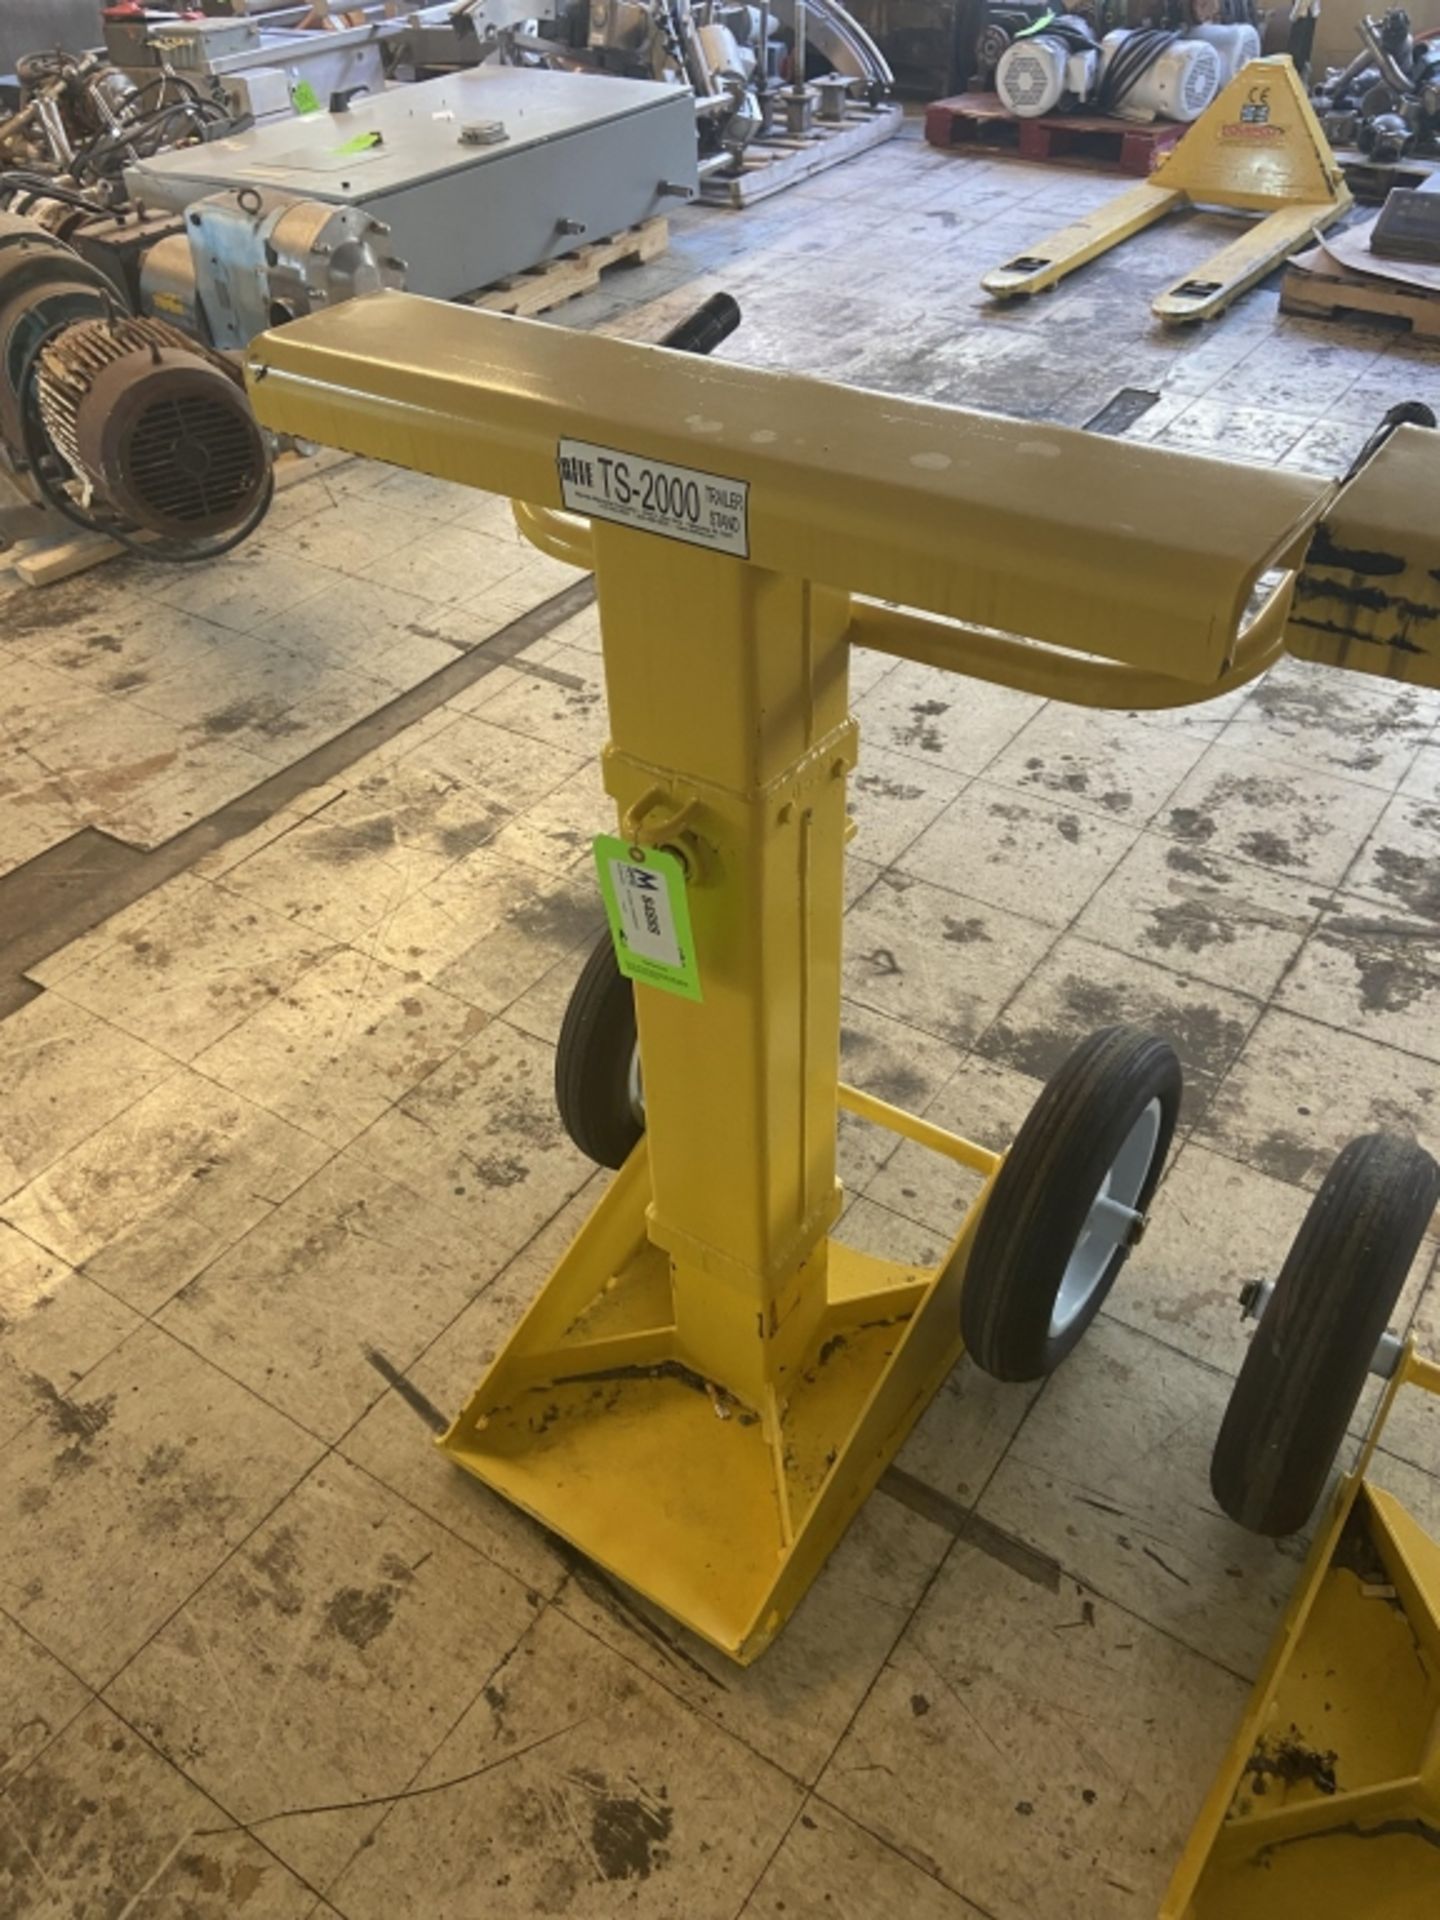 Rite Trailer Stand,M/N TS-2000, with (2) Rubber Wheels (INV#84888)(Located @ the MDG Showroom 2.0 in - Bild 2 aus 3